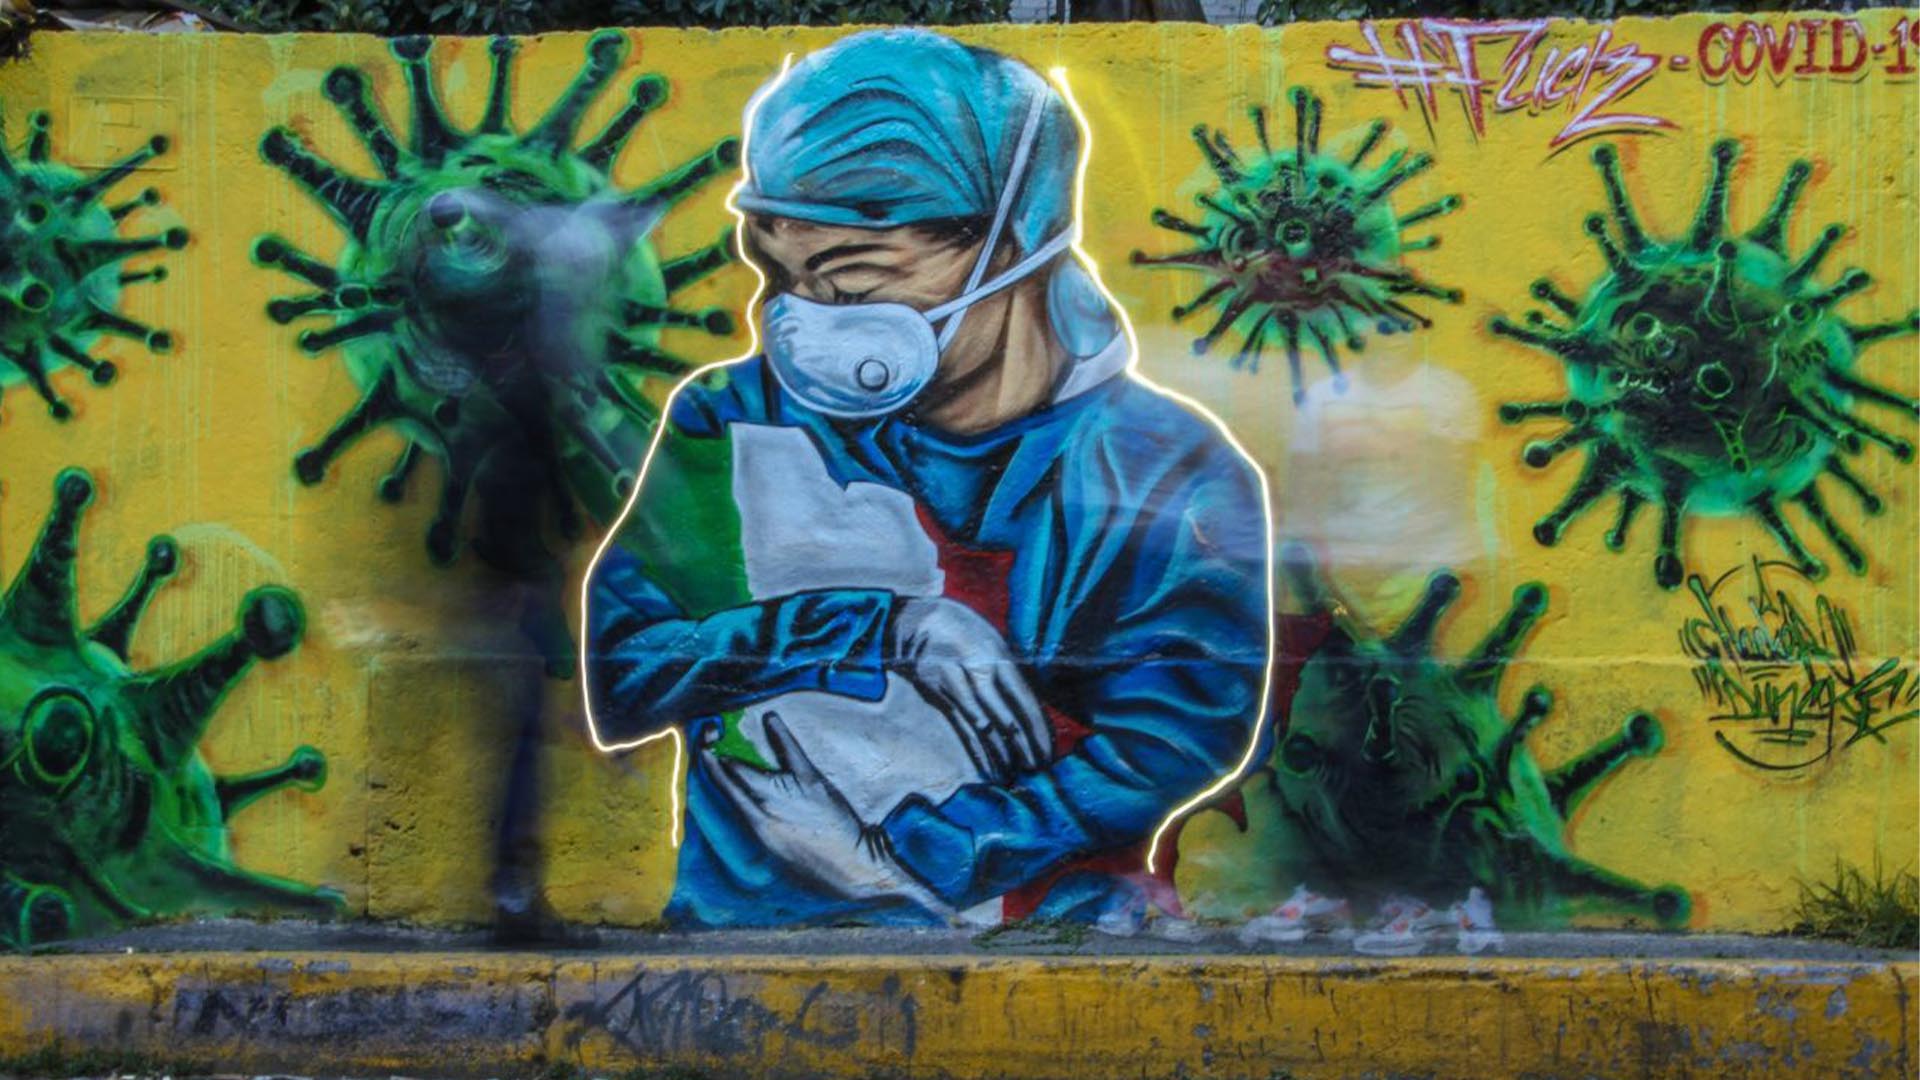 Urban artists of the city, make murals in support of medical personnel (Photo: Cuartoscuro)